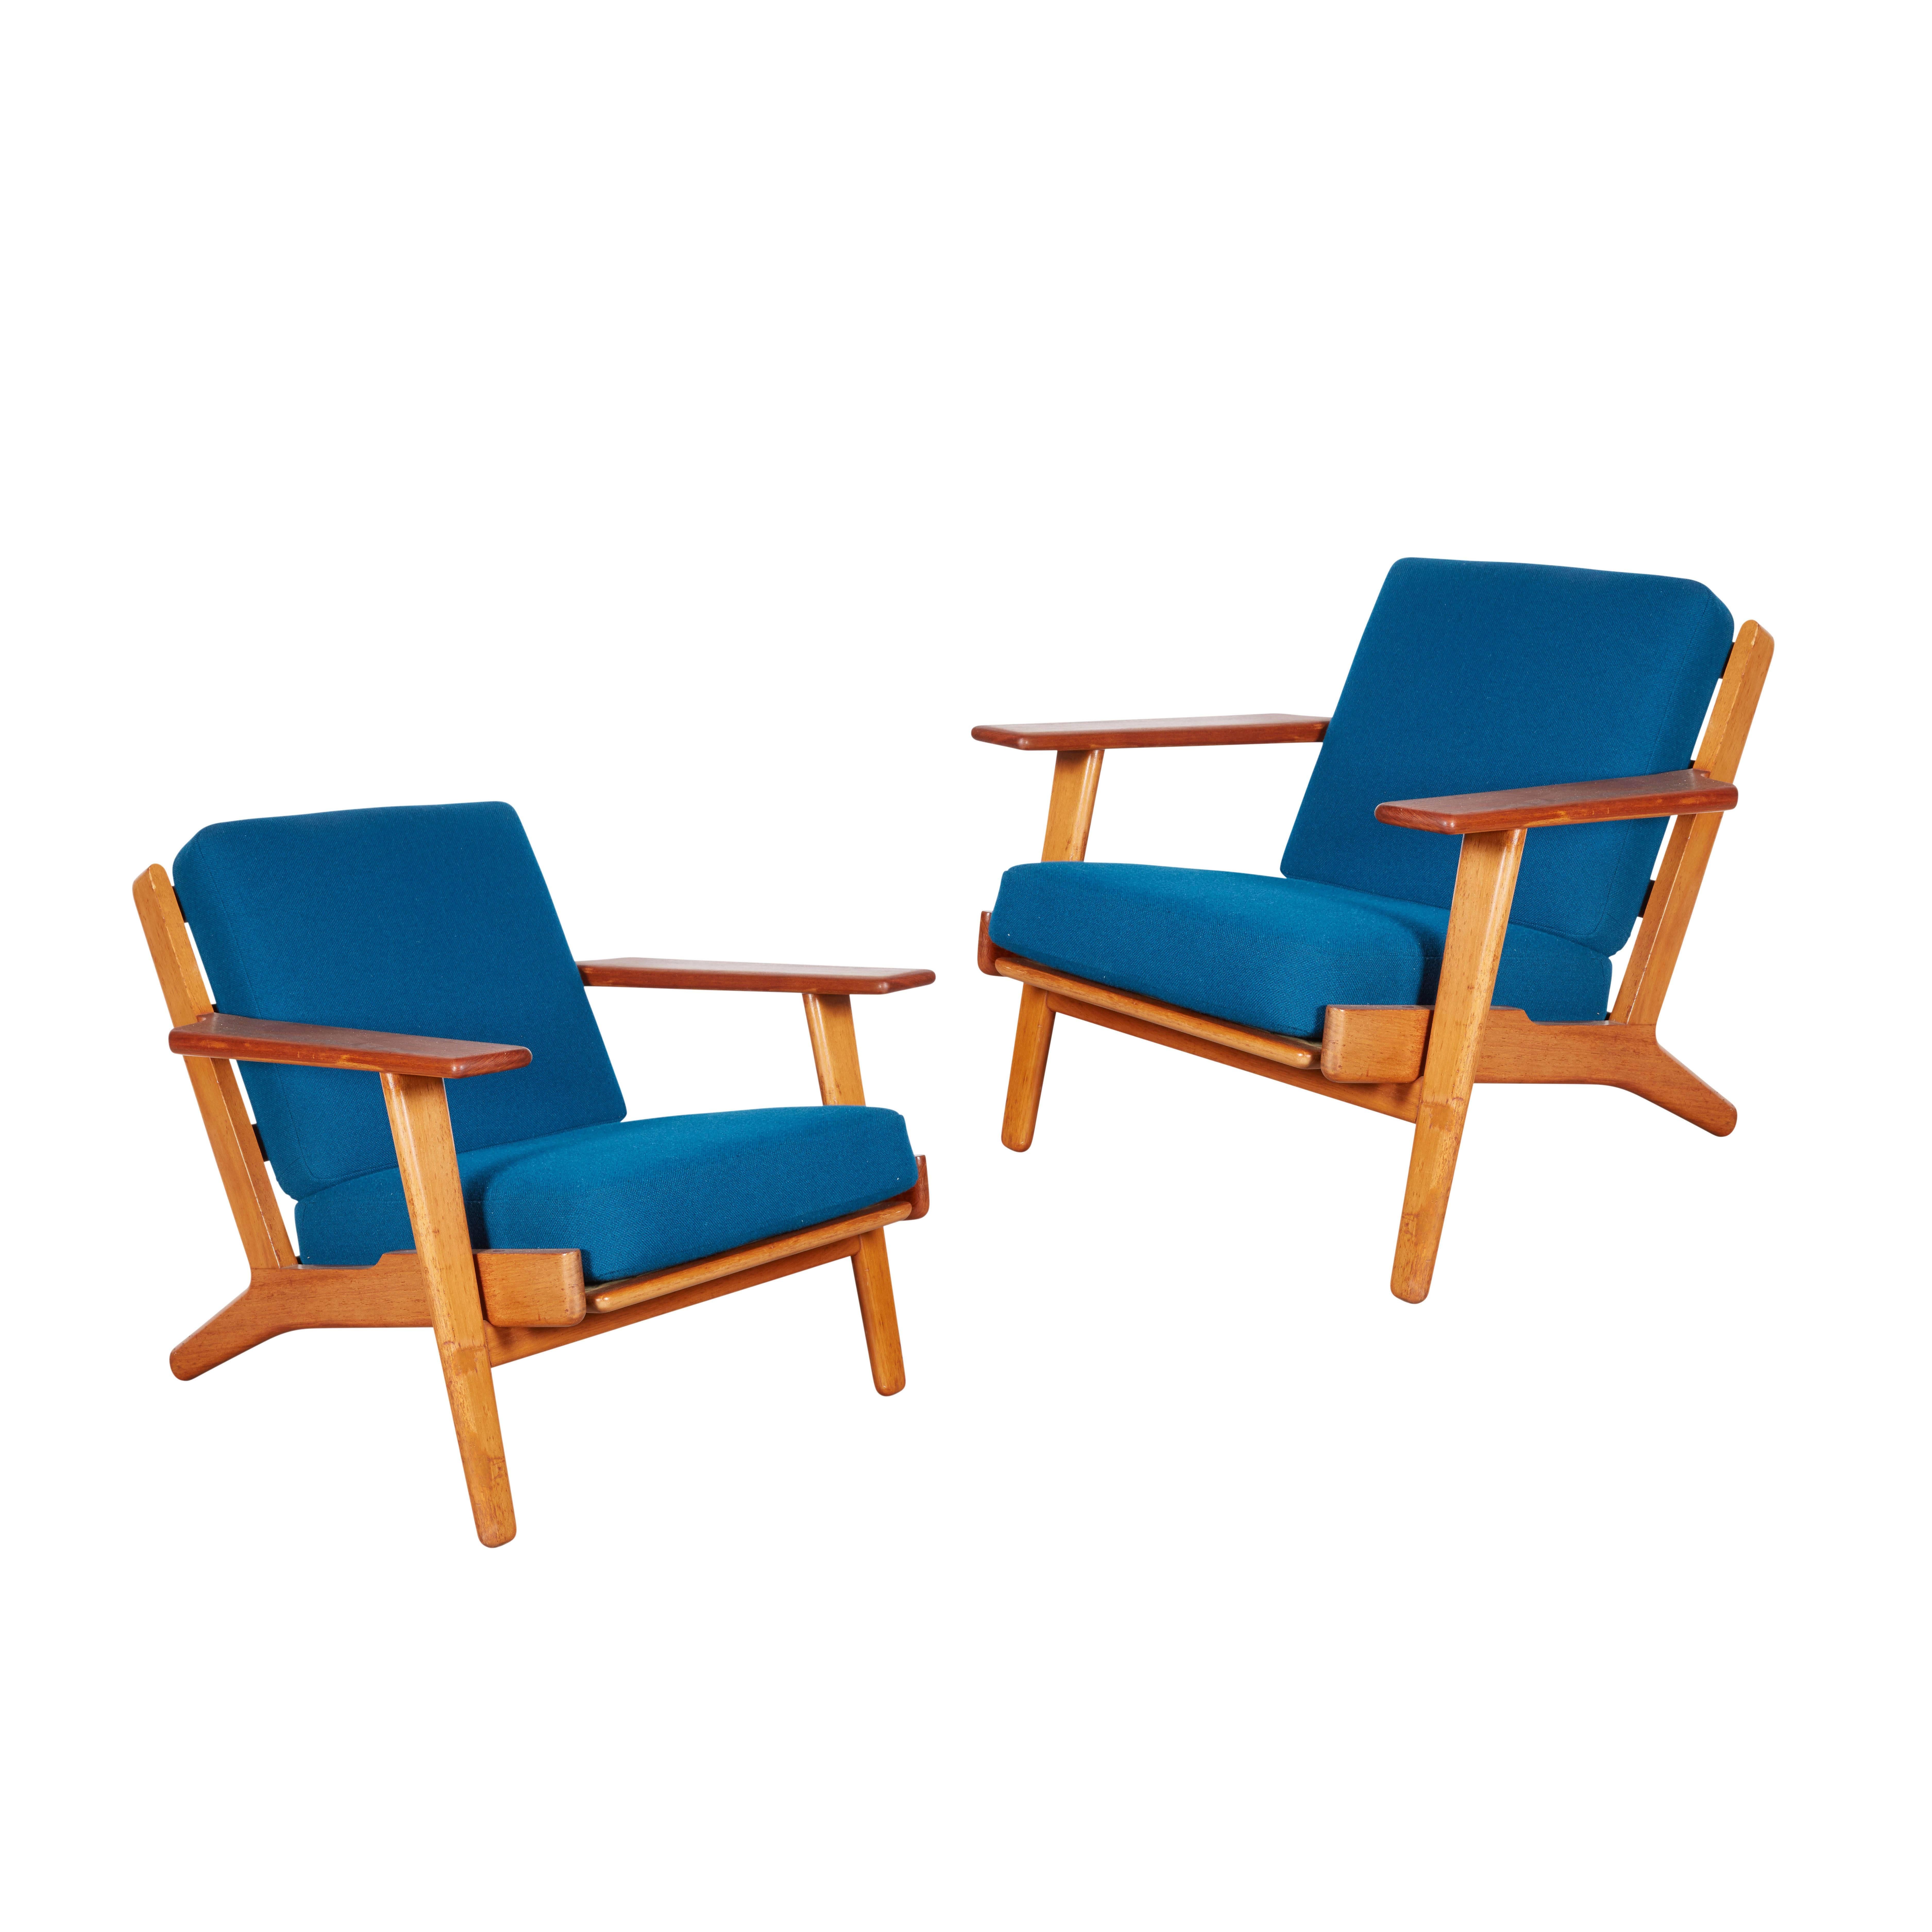 Vintage 1950s Hans Wegner Teak Chairs

These chairs are in excellent condition and has the original fabric which is also in wonderful condition. Cushions have springs. Ready for pick up, delivery, or shipping anywhere in the world.